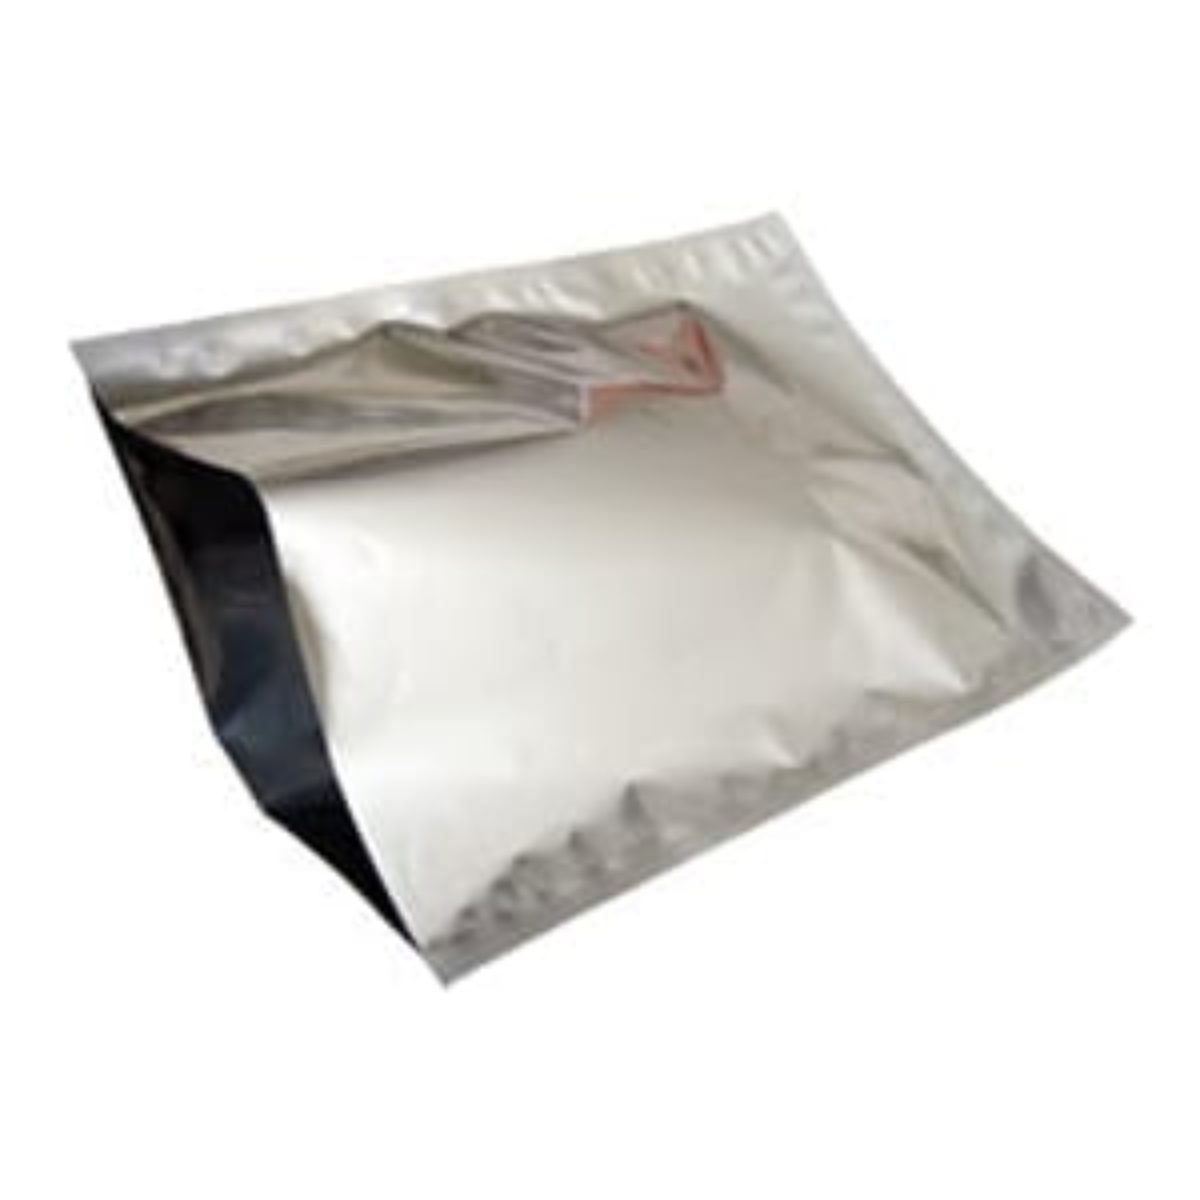 2 Gallon 5MIL Mylar Bags - Case of 250 - Vacuum Sealers Unlimited